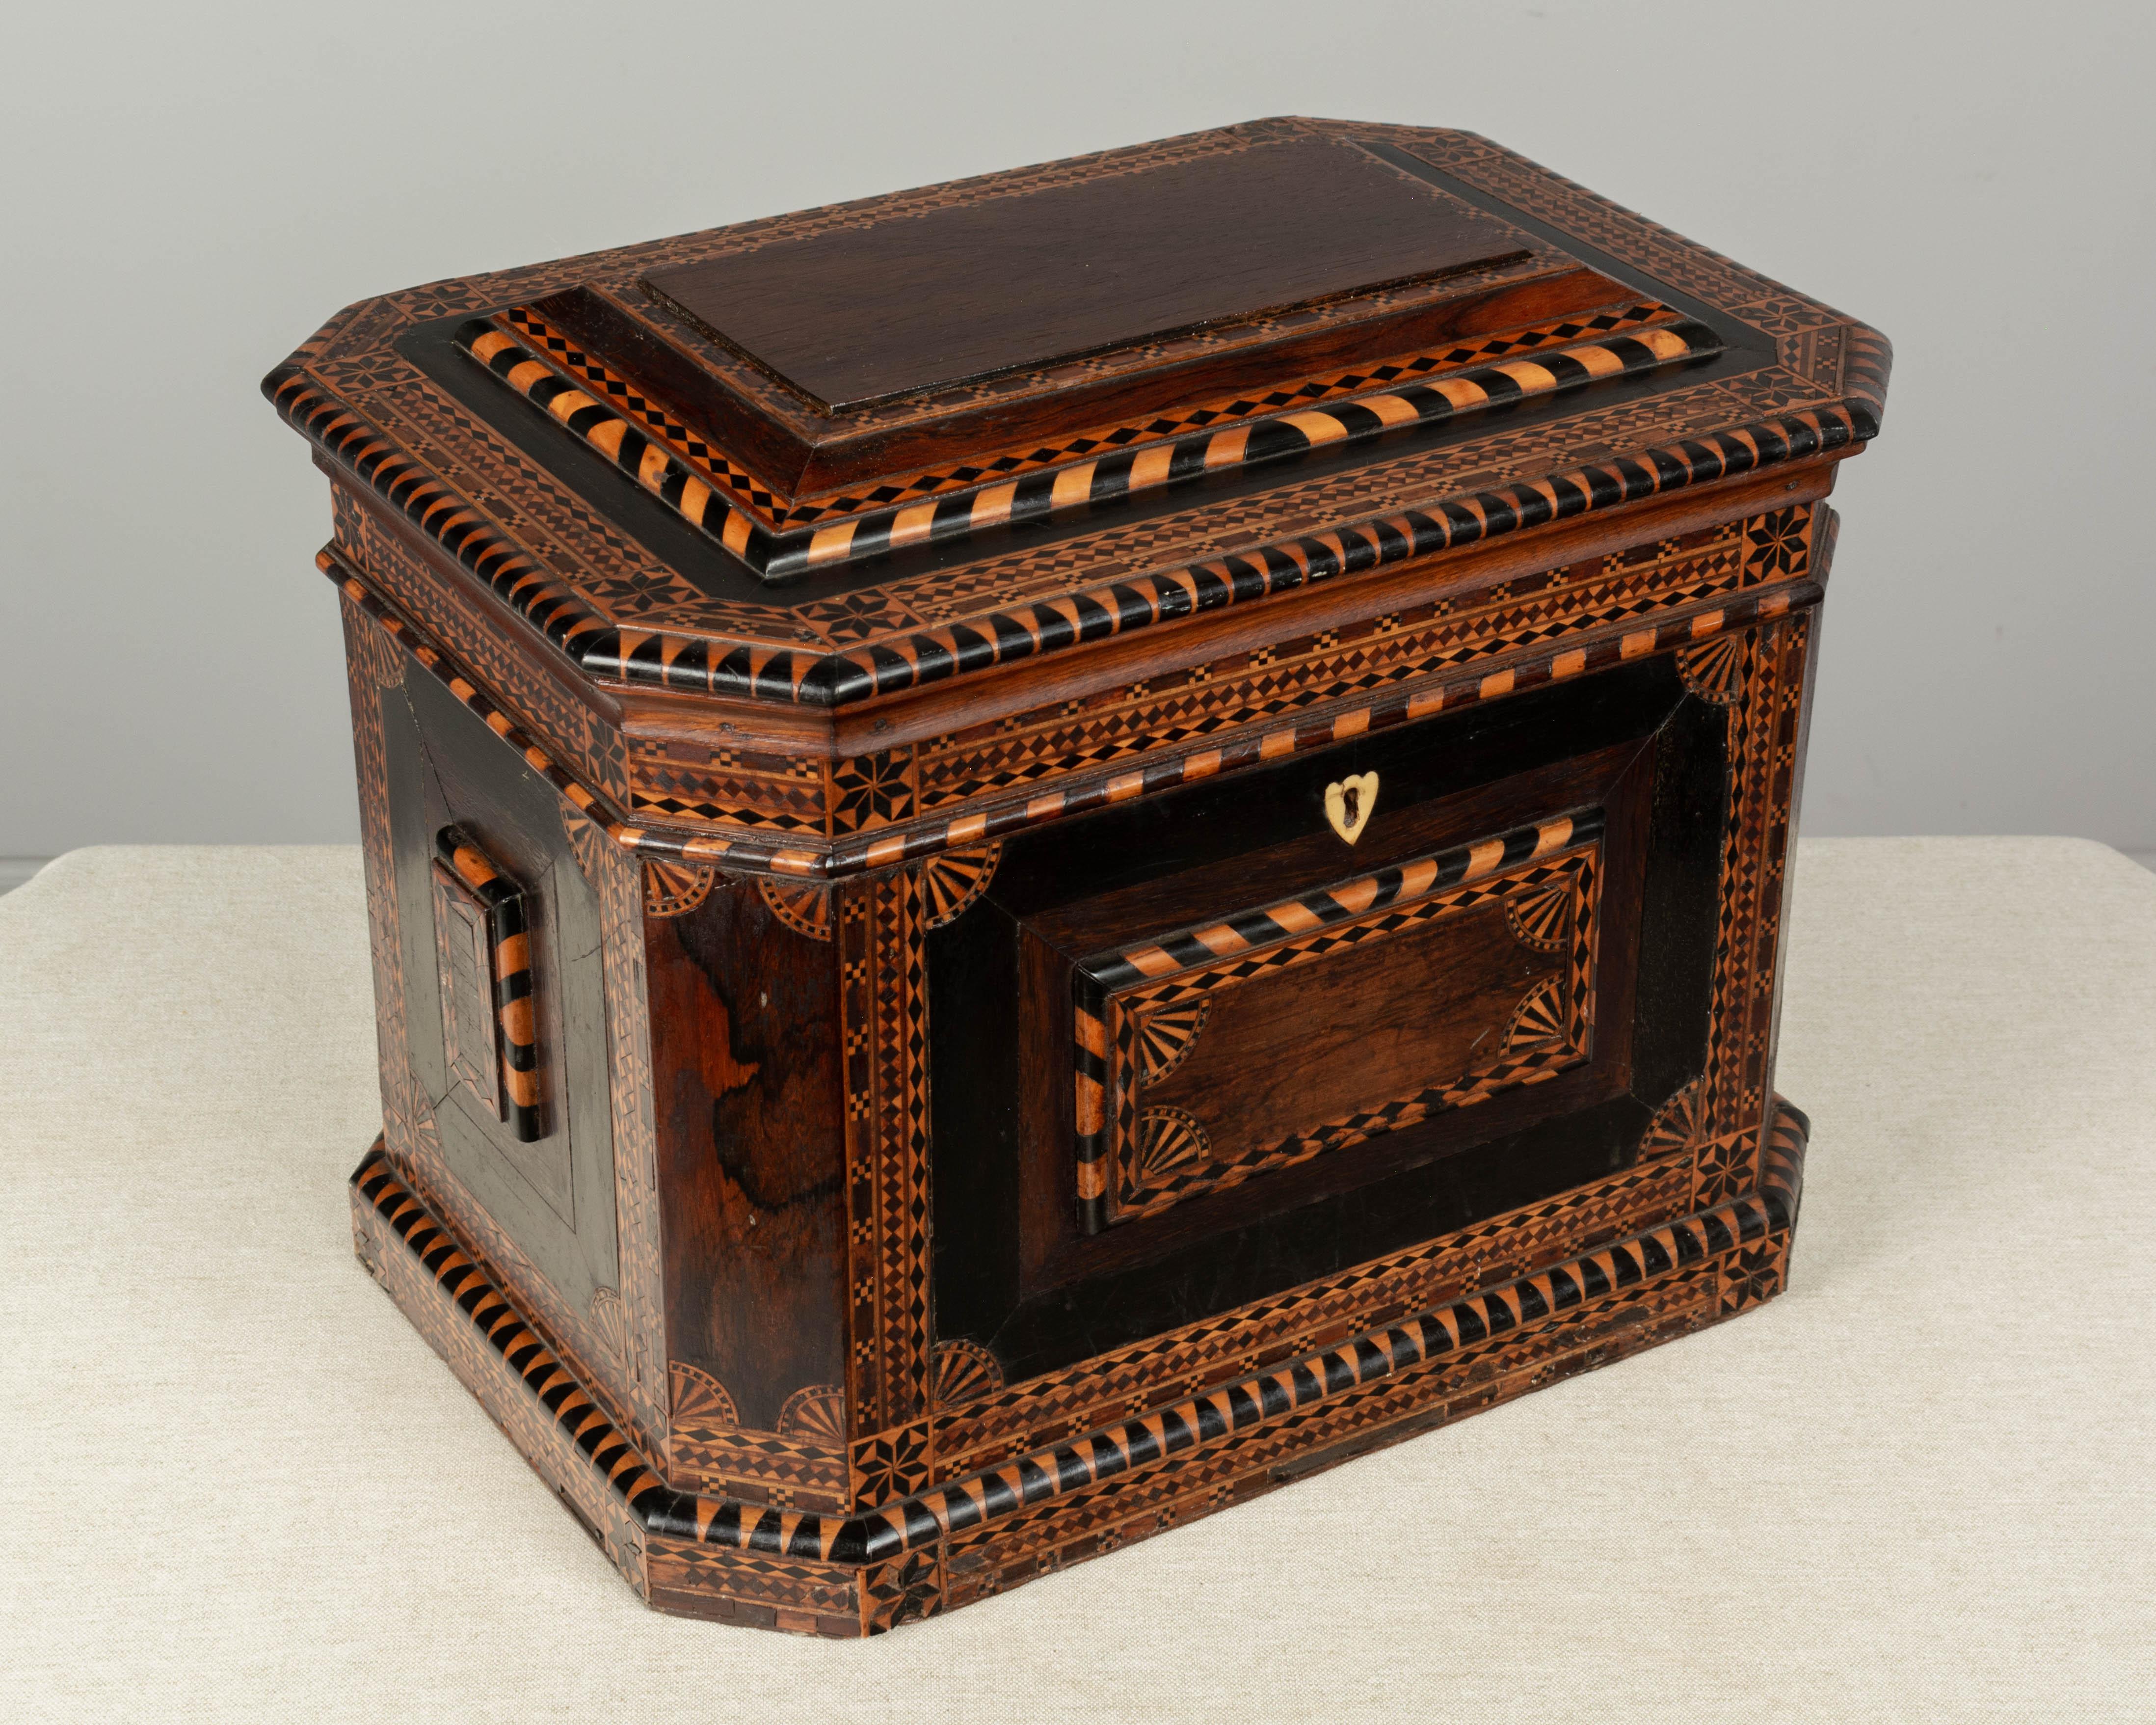 A large 19th century American folk art marquetry box made of rosewood with various inlaid wood veneers and ebonized decoration. This was probably a sewing box and was made by a skilled craftsman who used some of the geometric motifs common in